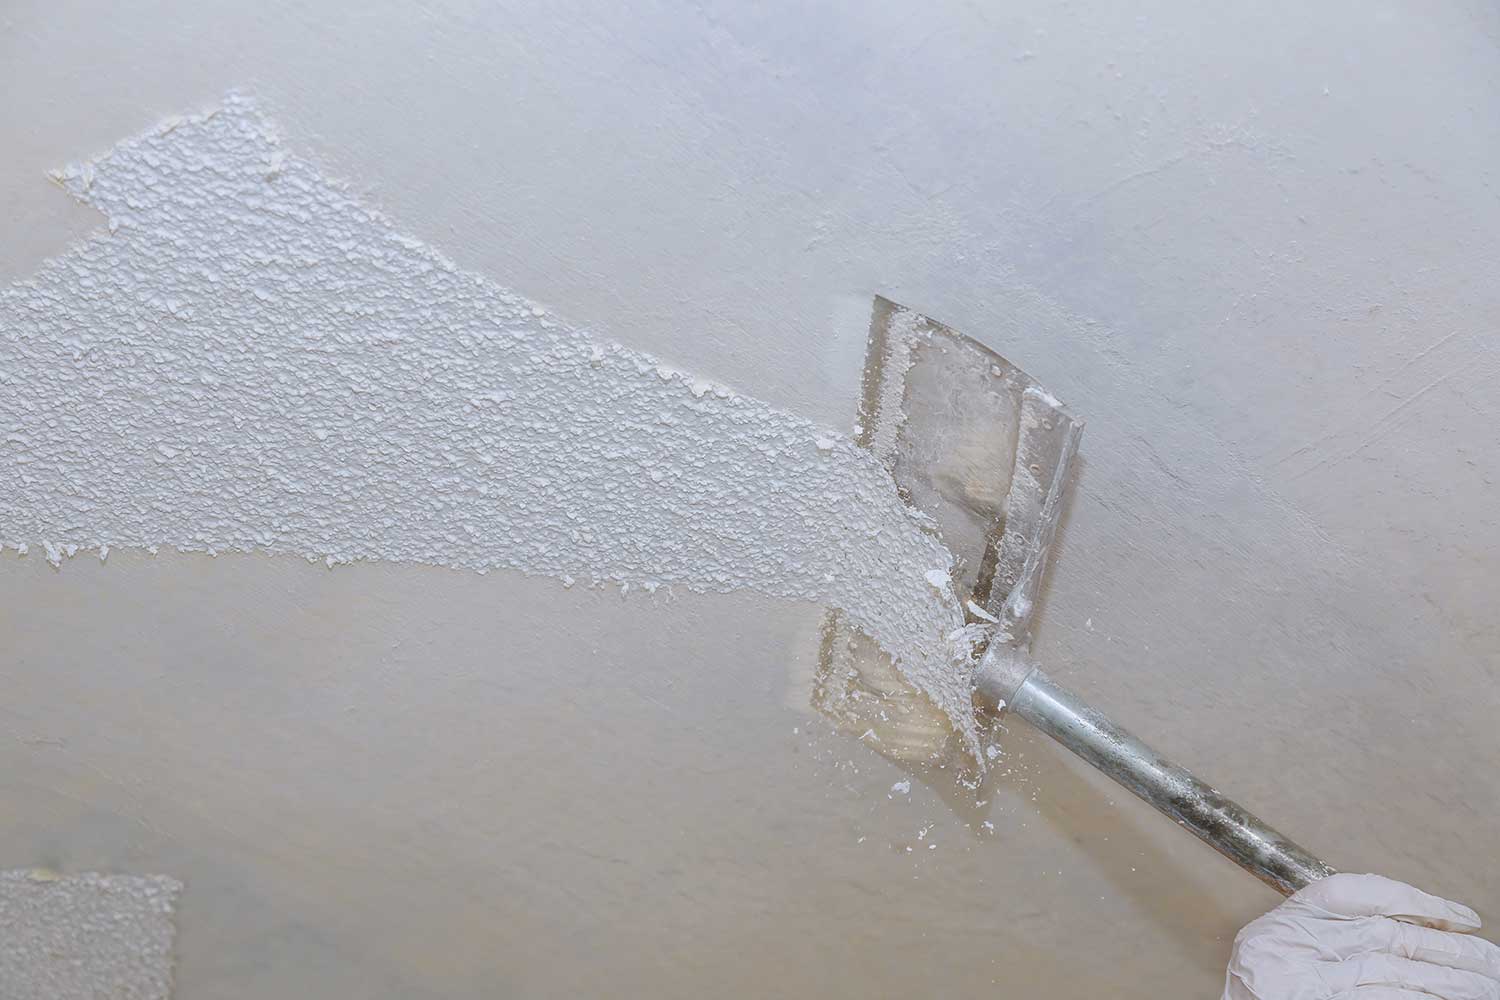 Home ceiling drywall demolition popcorn ceiling texture